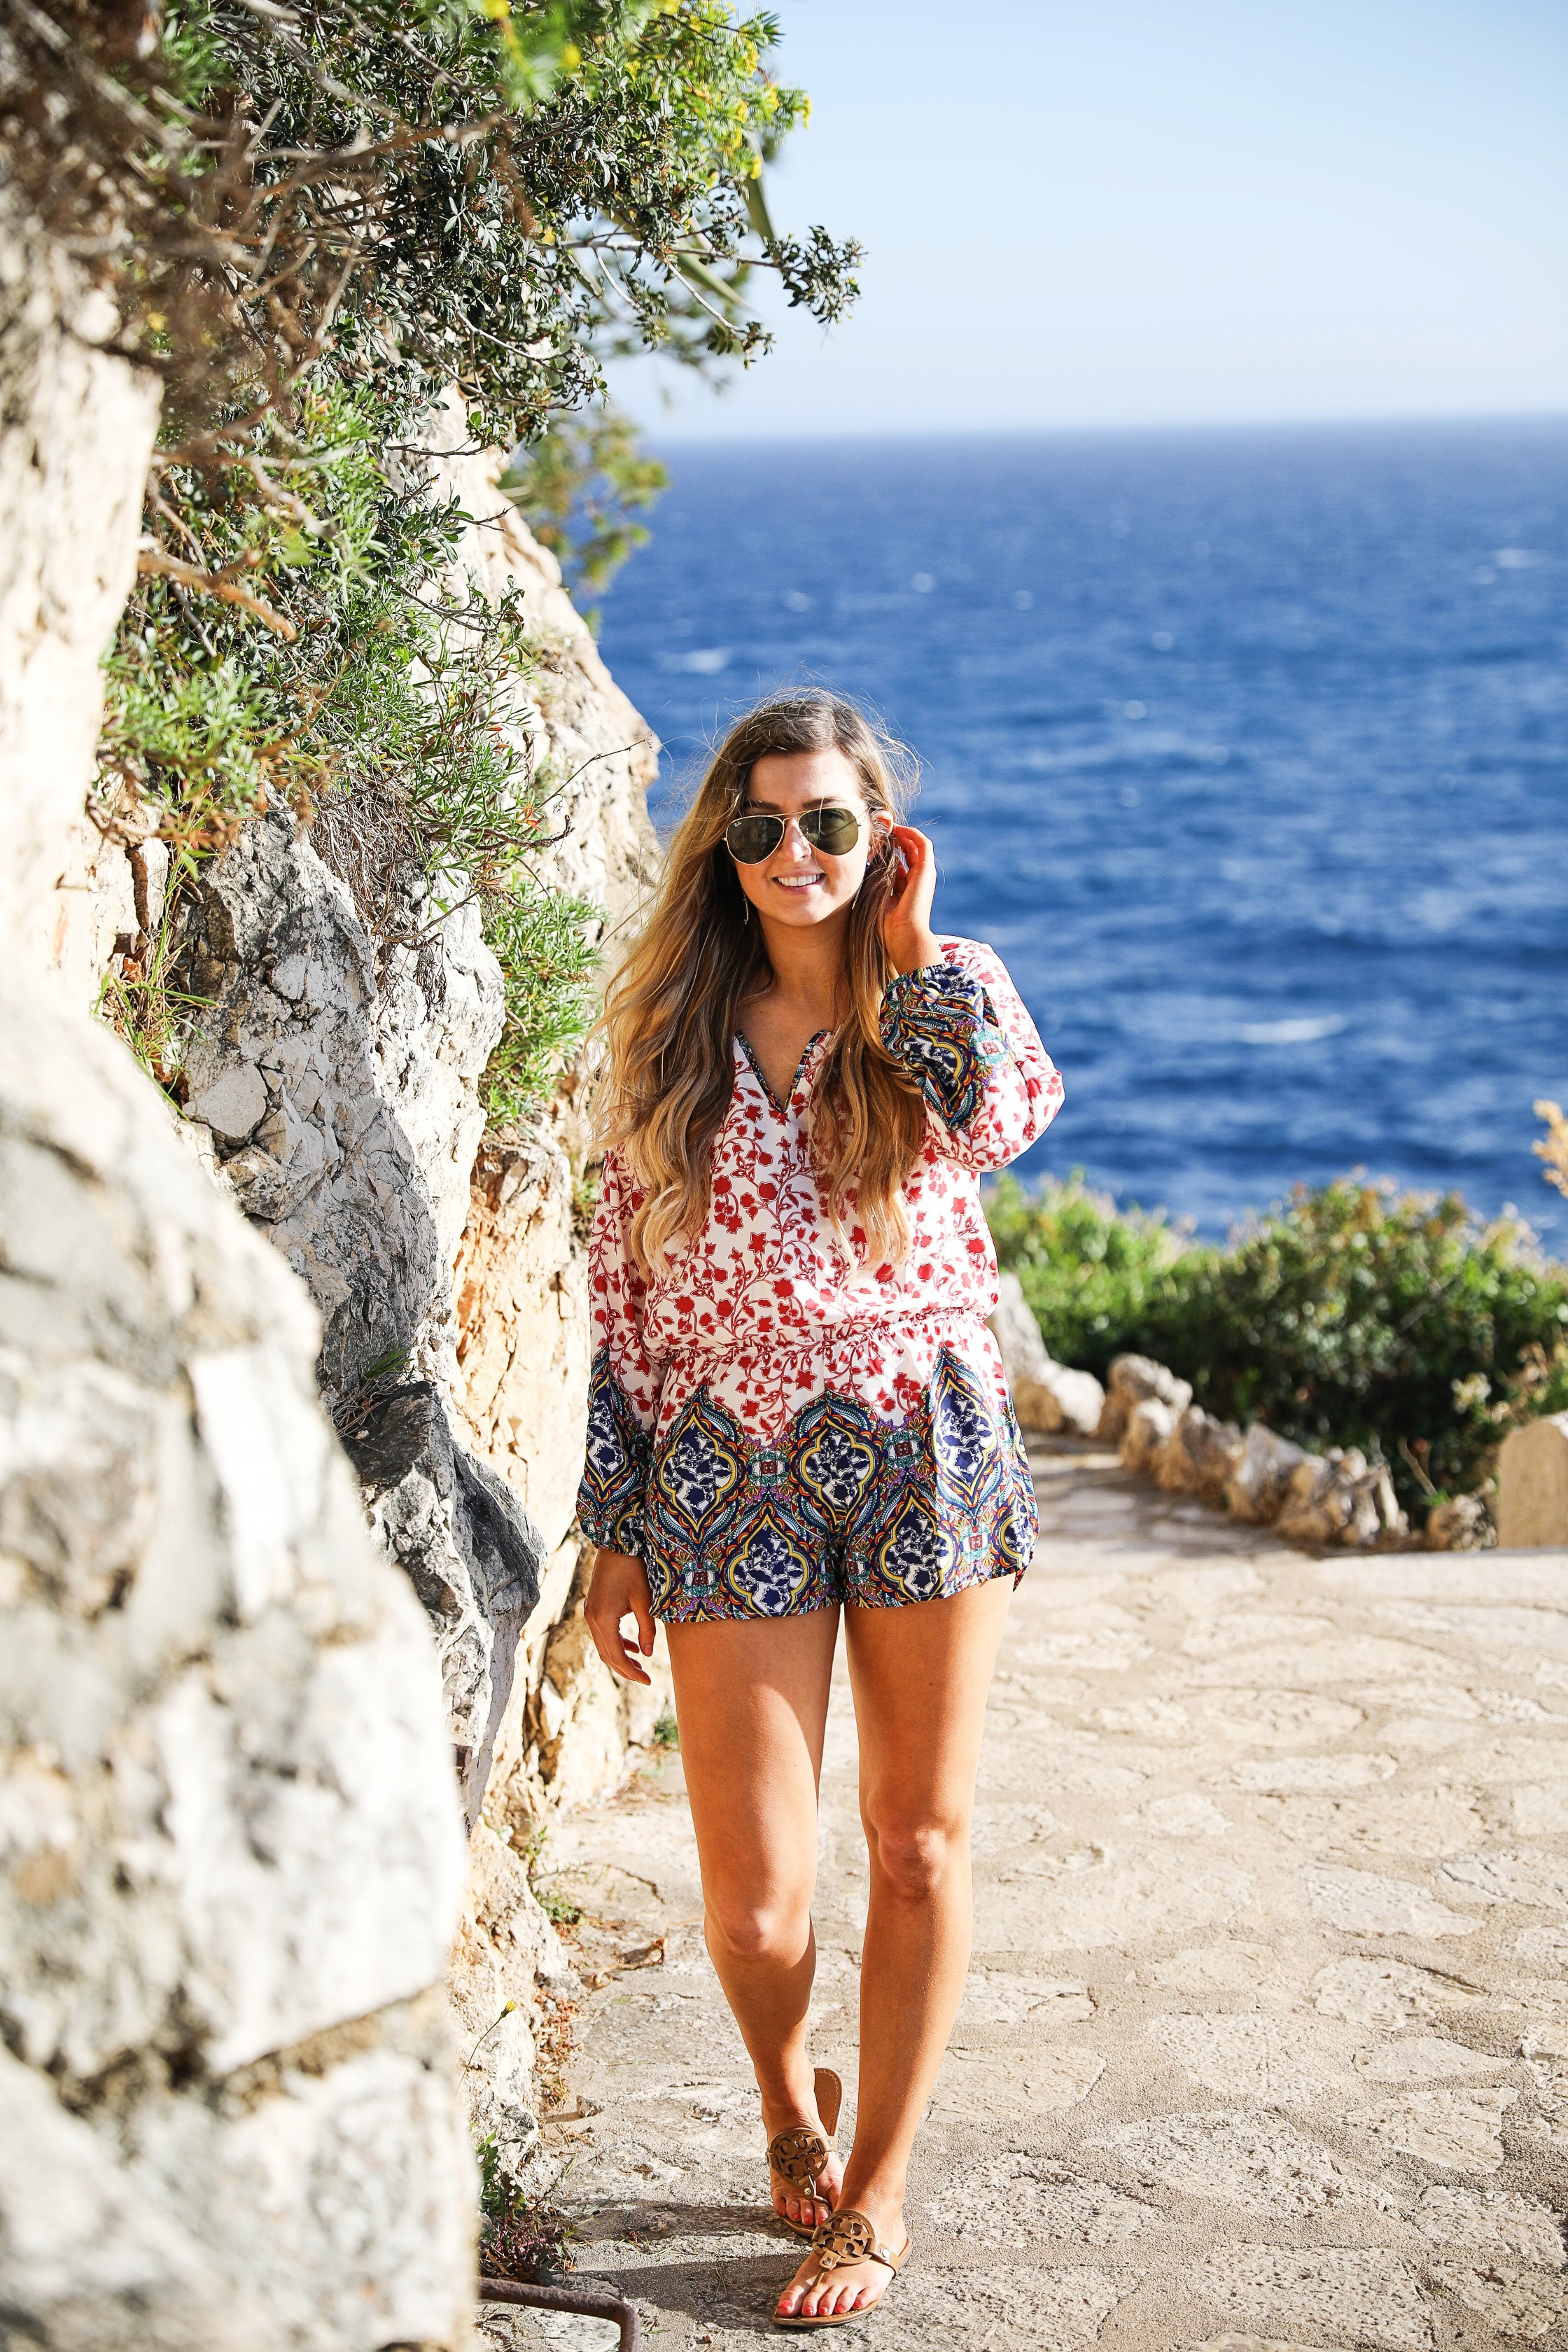 Romper by the ocean in Nice, France. The perfect outfit for a beach day! By Lauren Lindmark on dailydoseofcharm.com daily dose of charm fashion blog